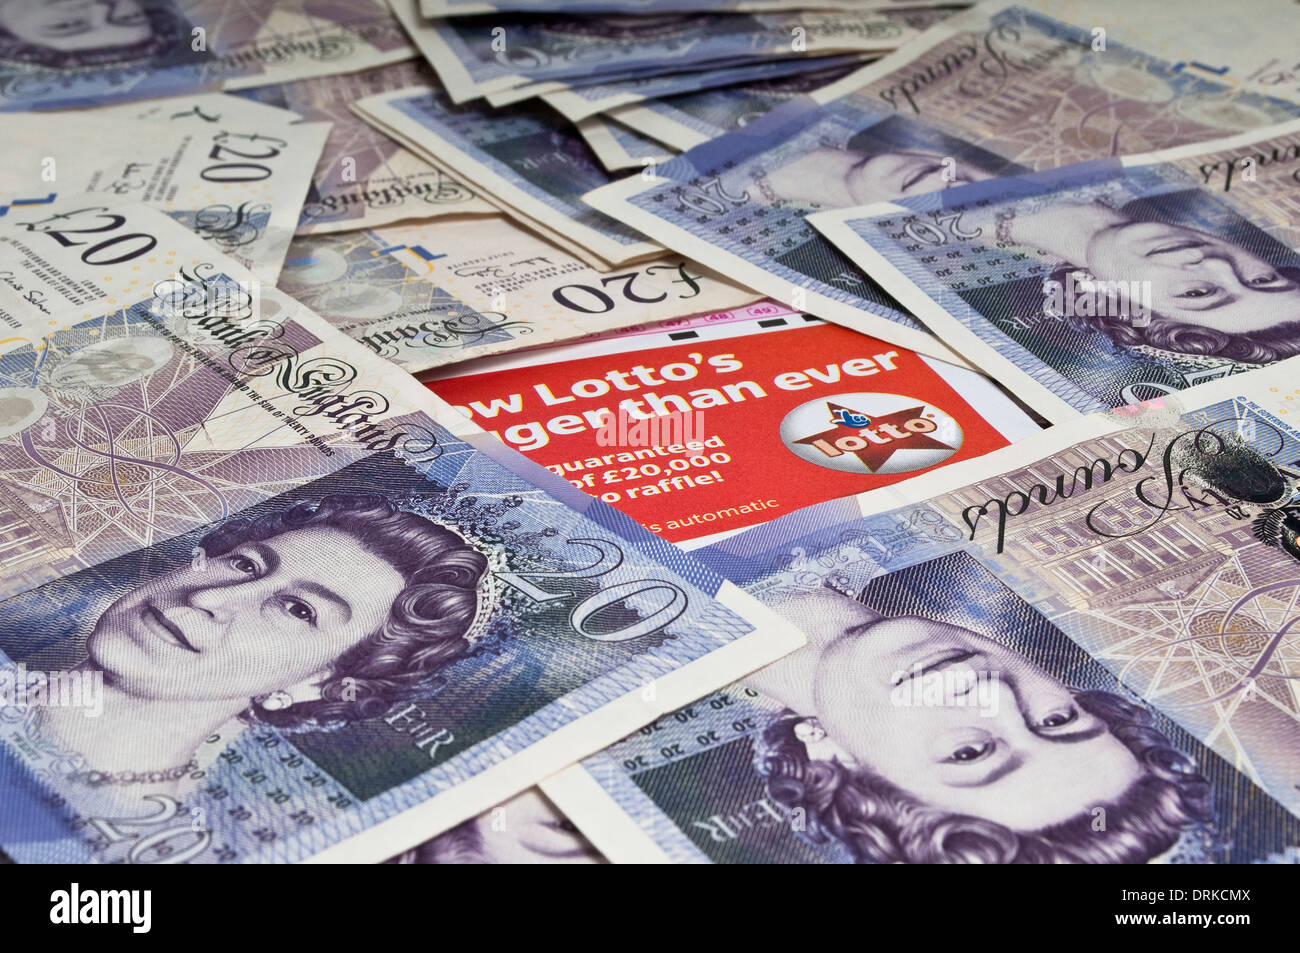 Lottery ticket in the middle of a pile of scattered twenty pound notes Stock Photo